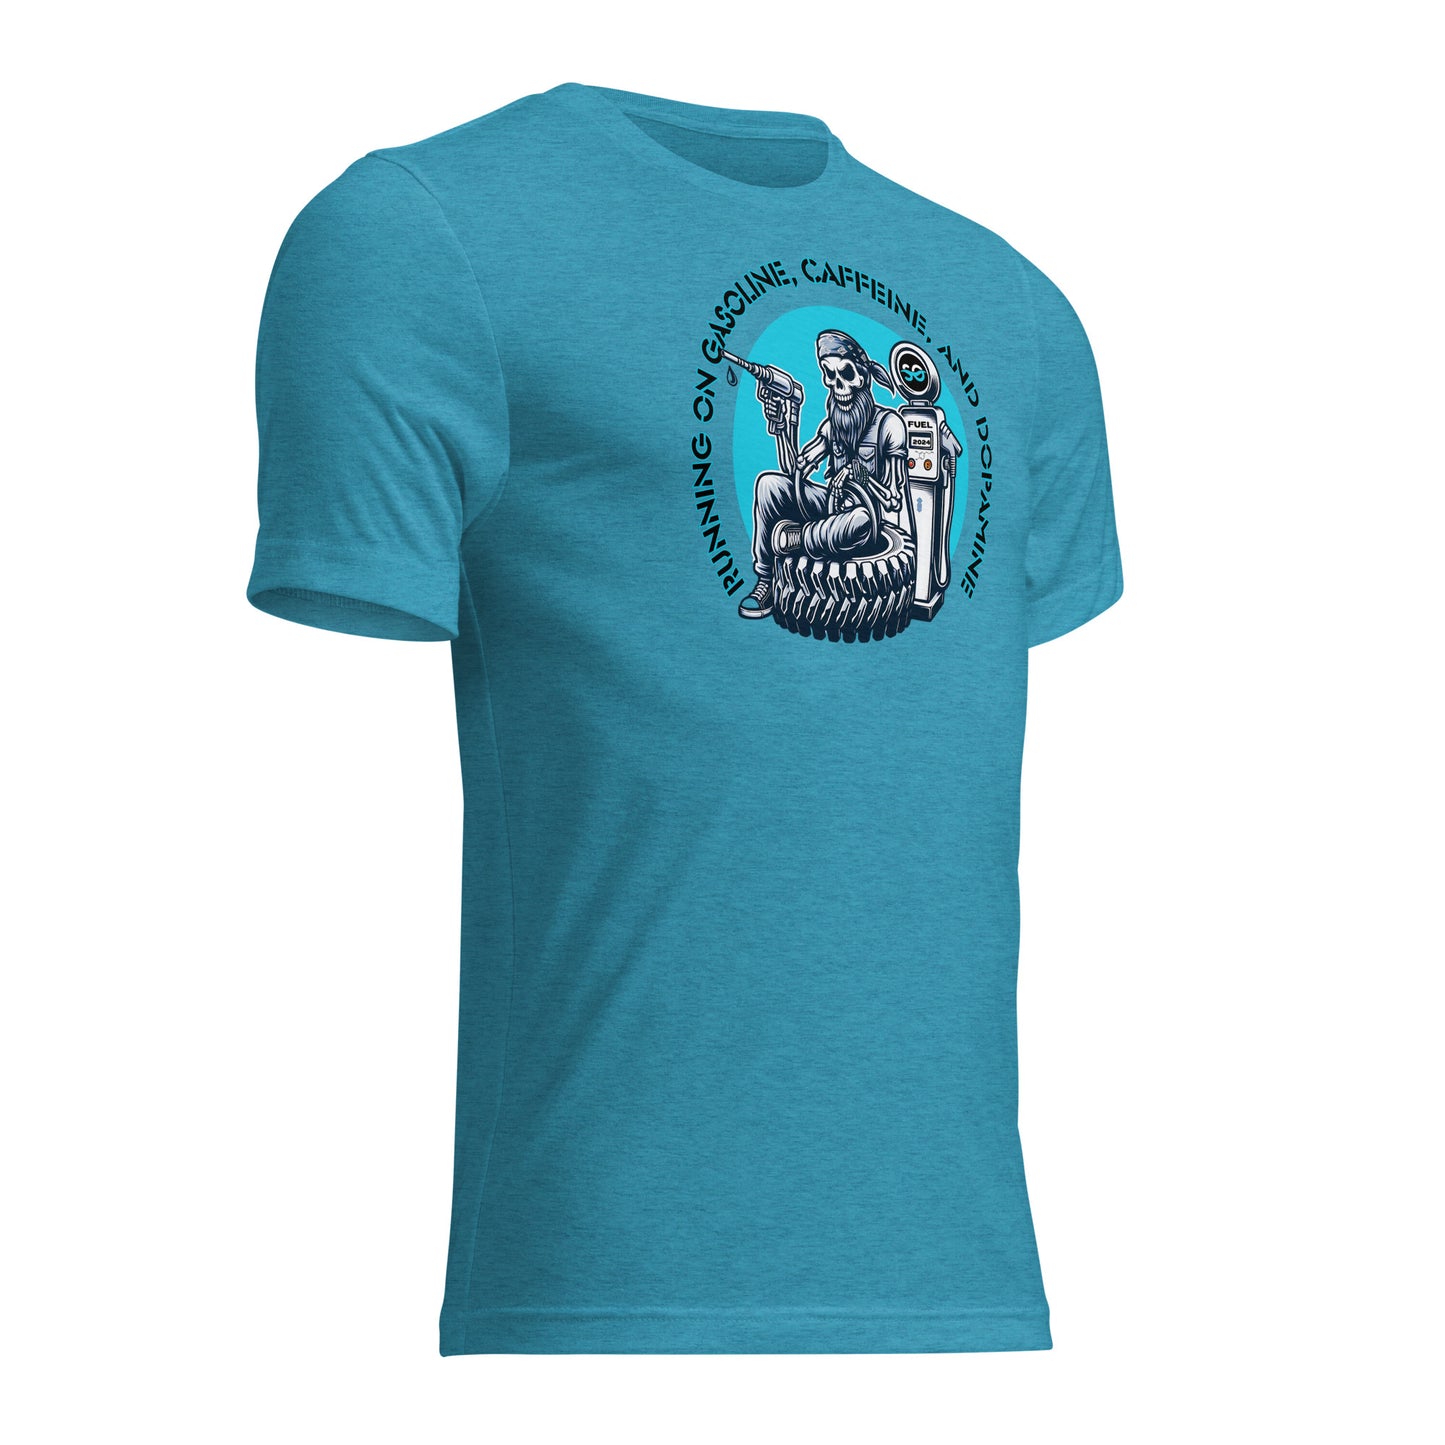 a blue t - shirt with an image of a skeleton riding a motorcycle